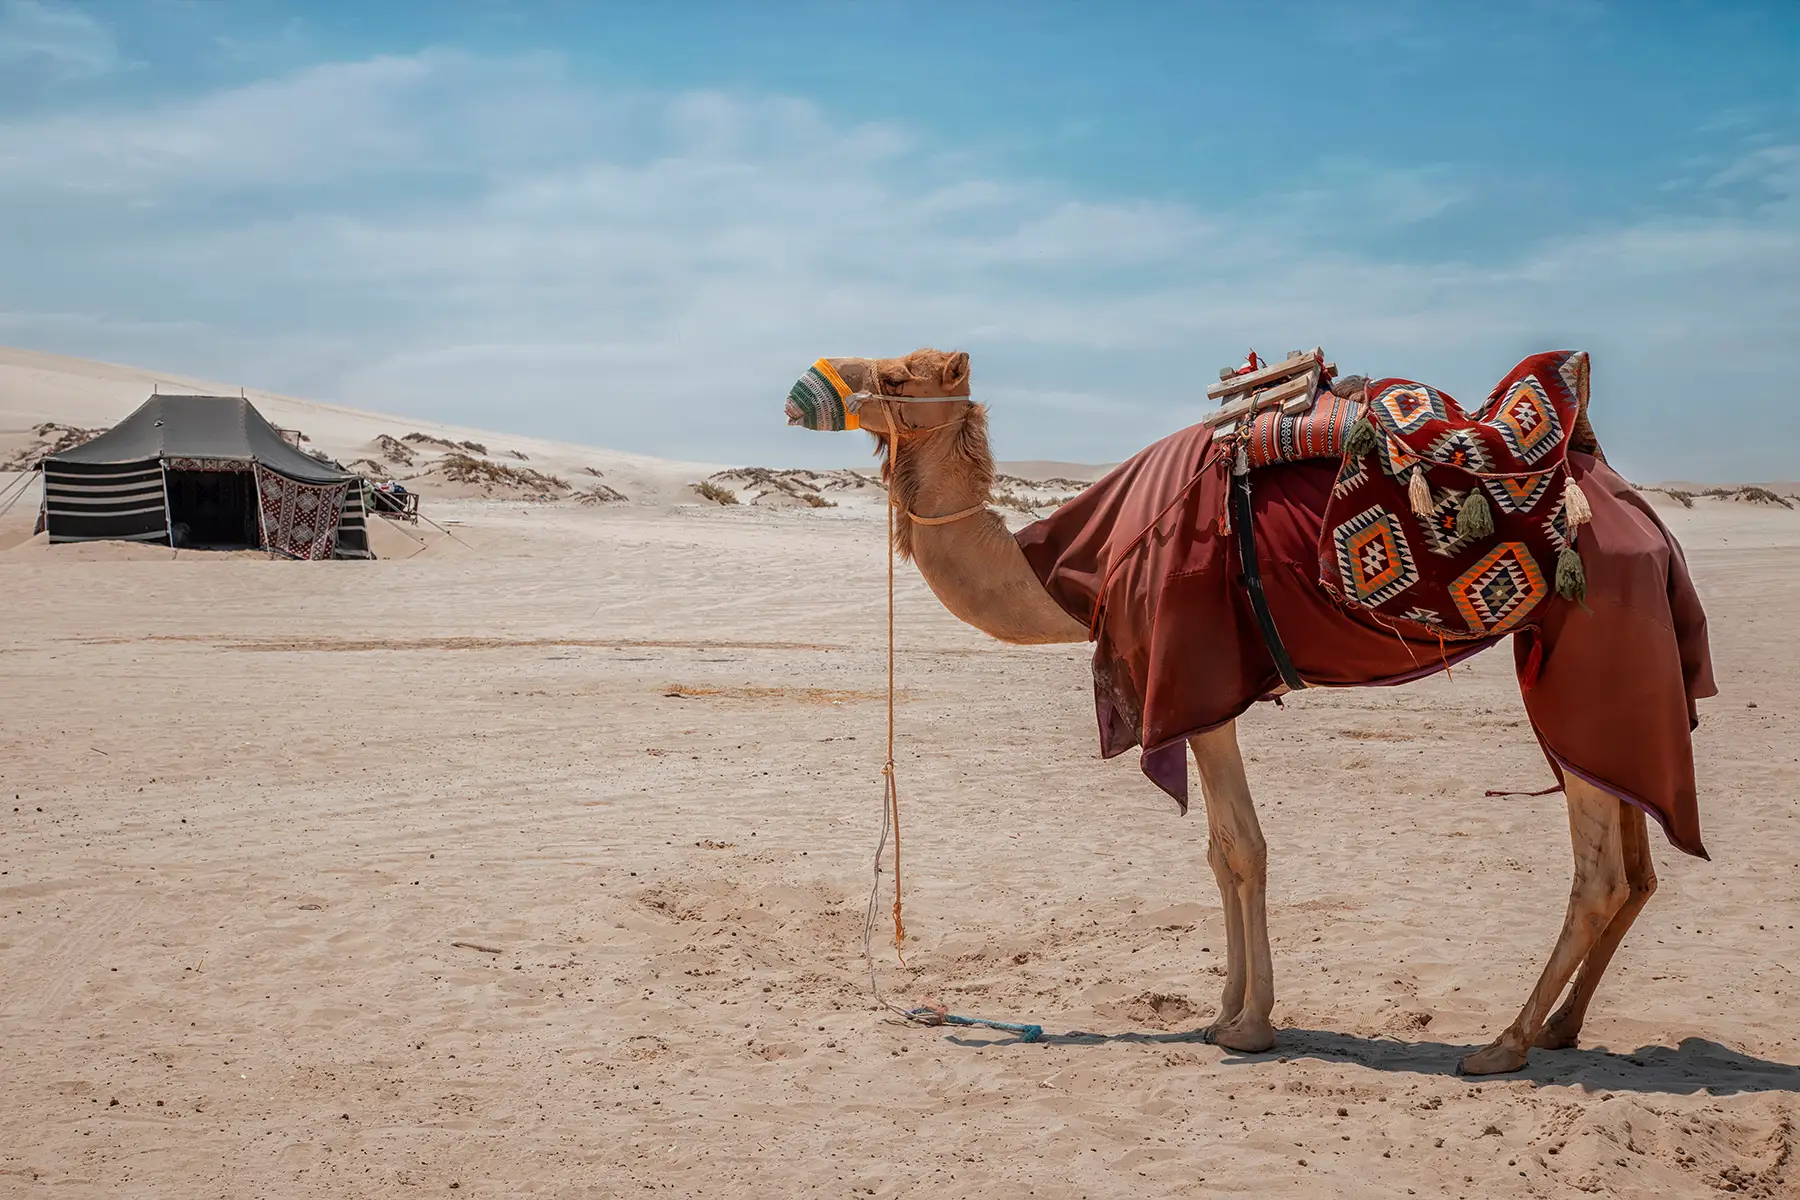 A camel and a Bedouin tent in Qatar